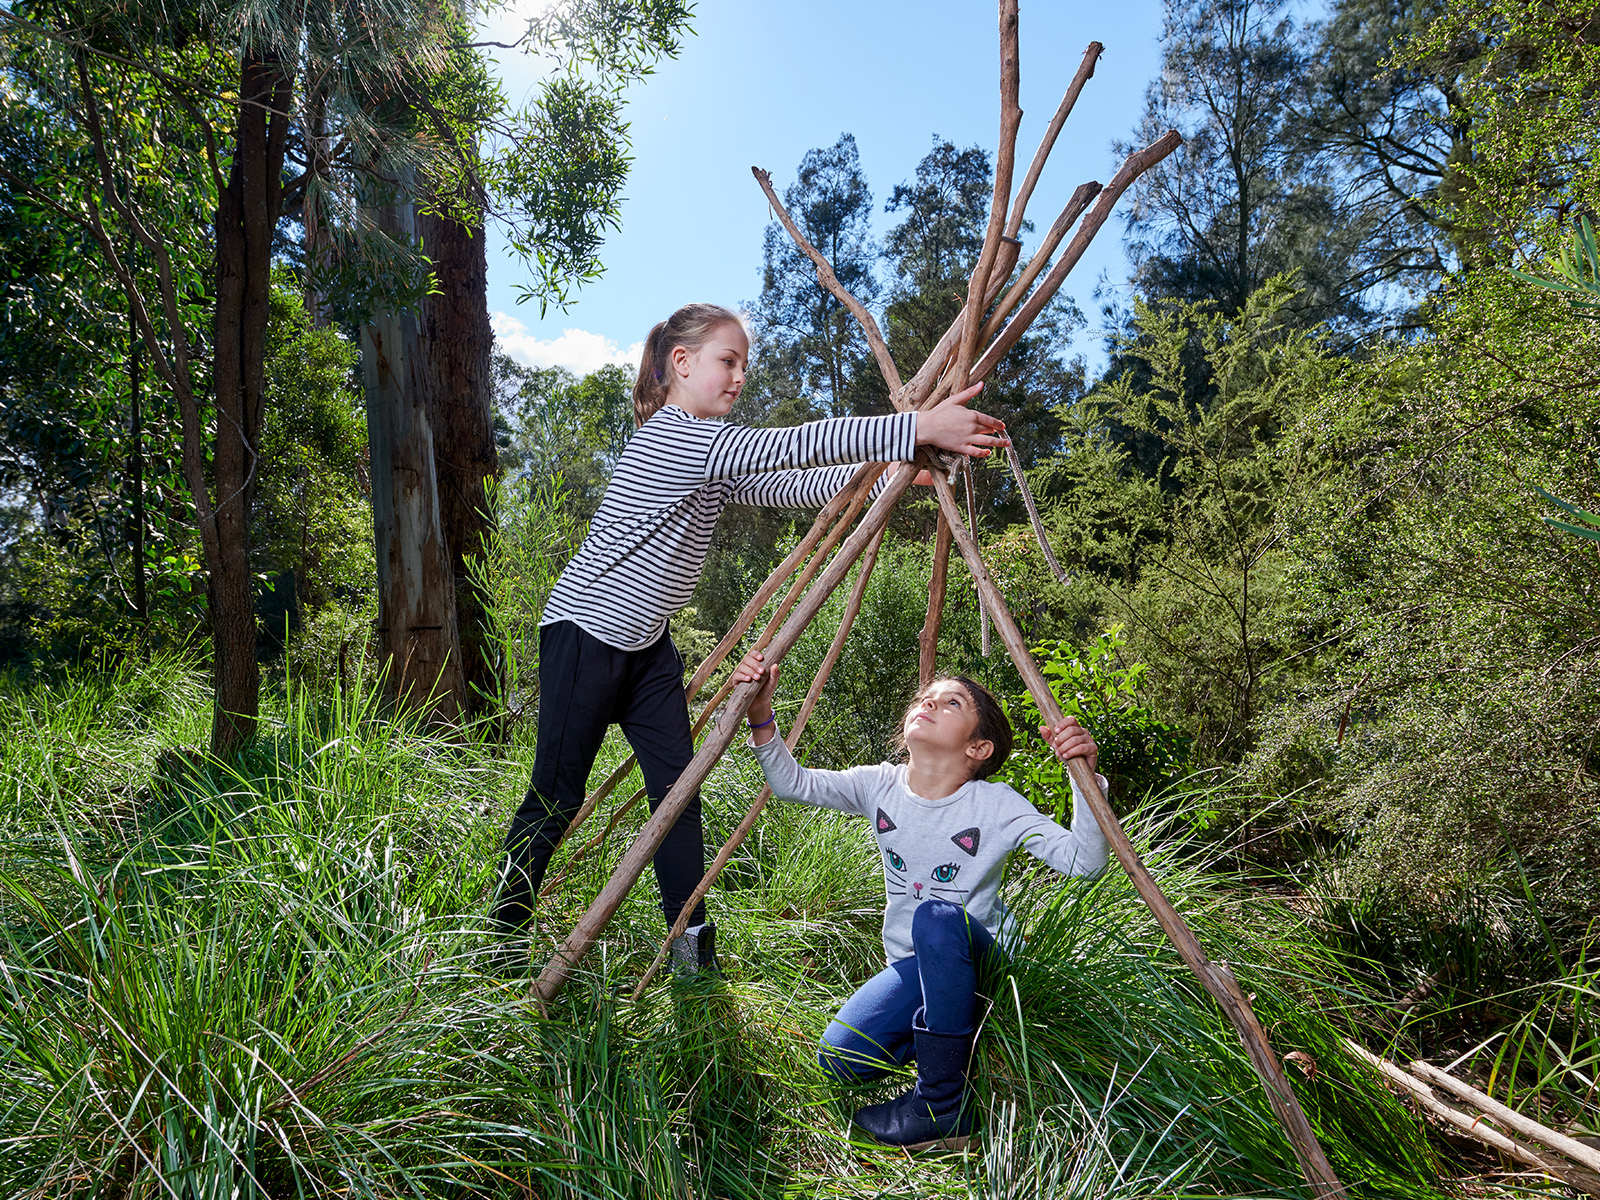 Two young girls assemble large branches to build a gunyah